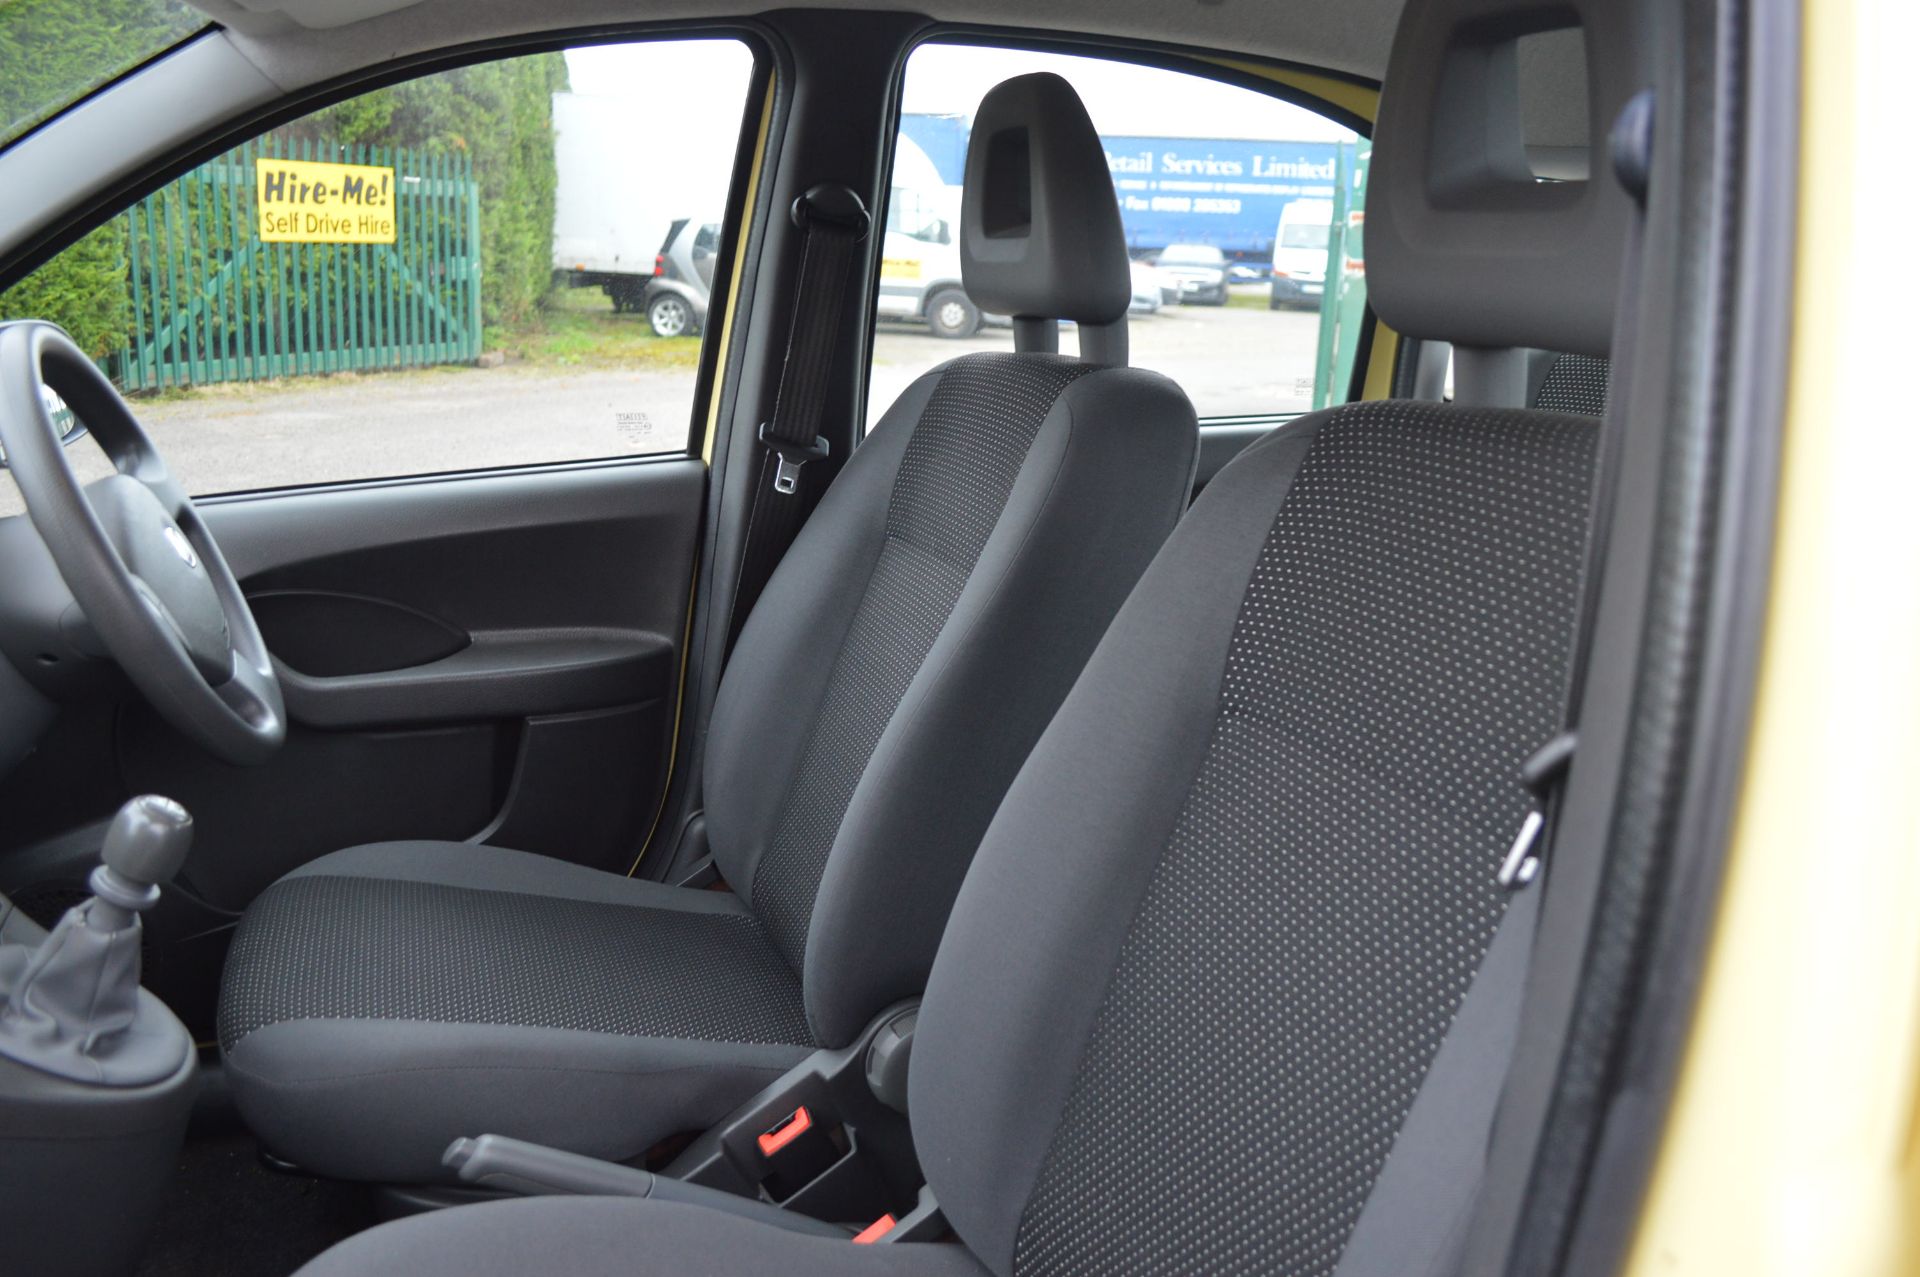 2010/59 REG FIAT PANDA ACTIVE ECO, SHOWING 1 OWNER FROM NEW - DRIVES GREAT - Image 10 of 25